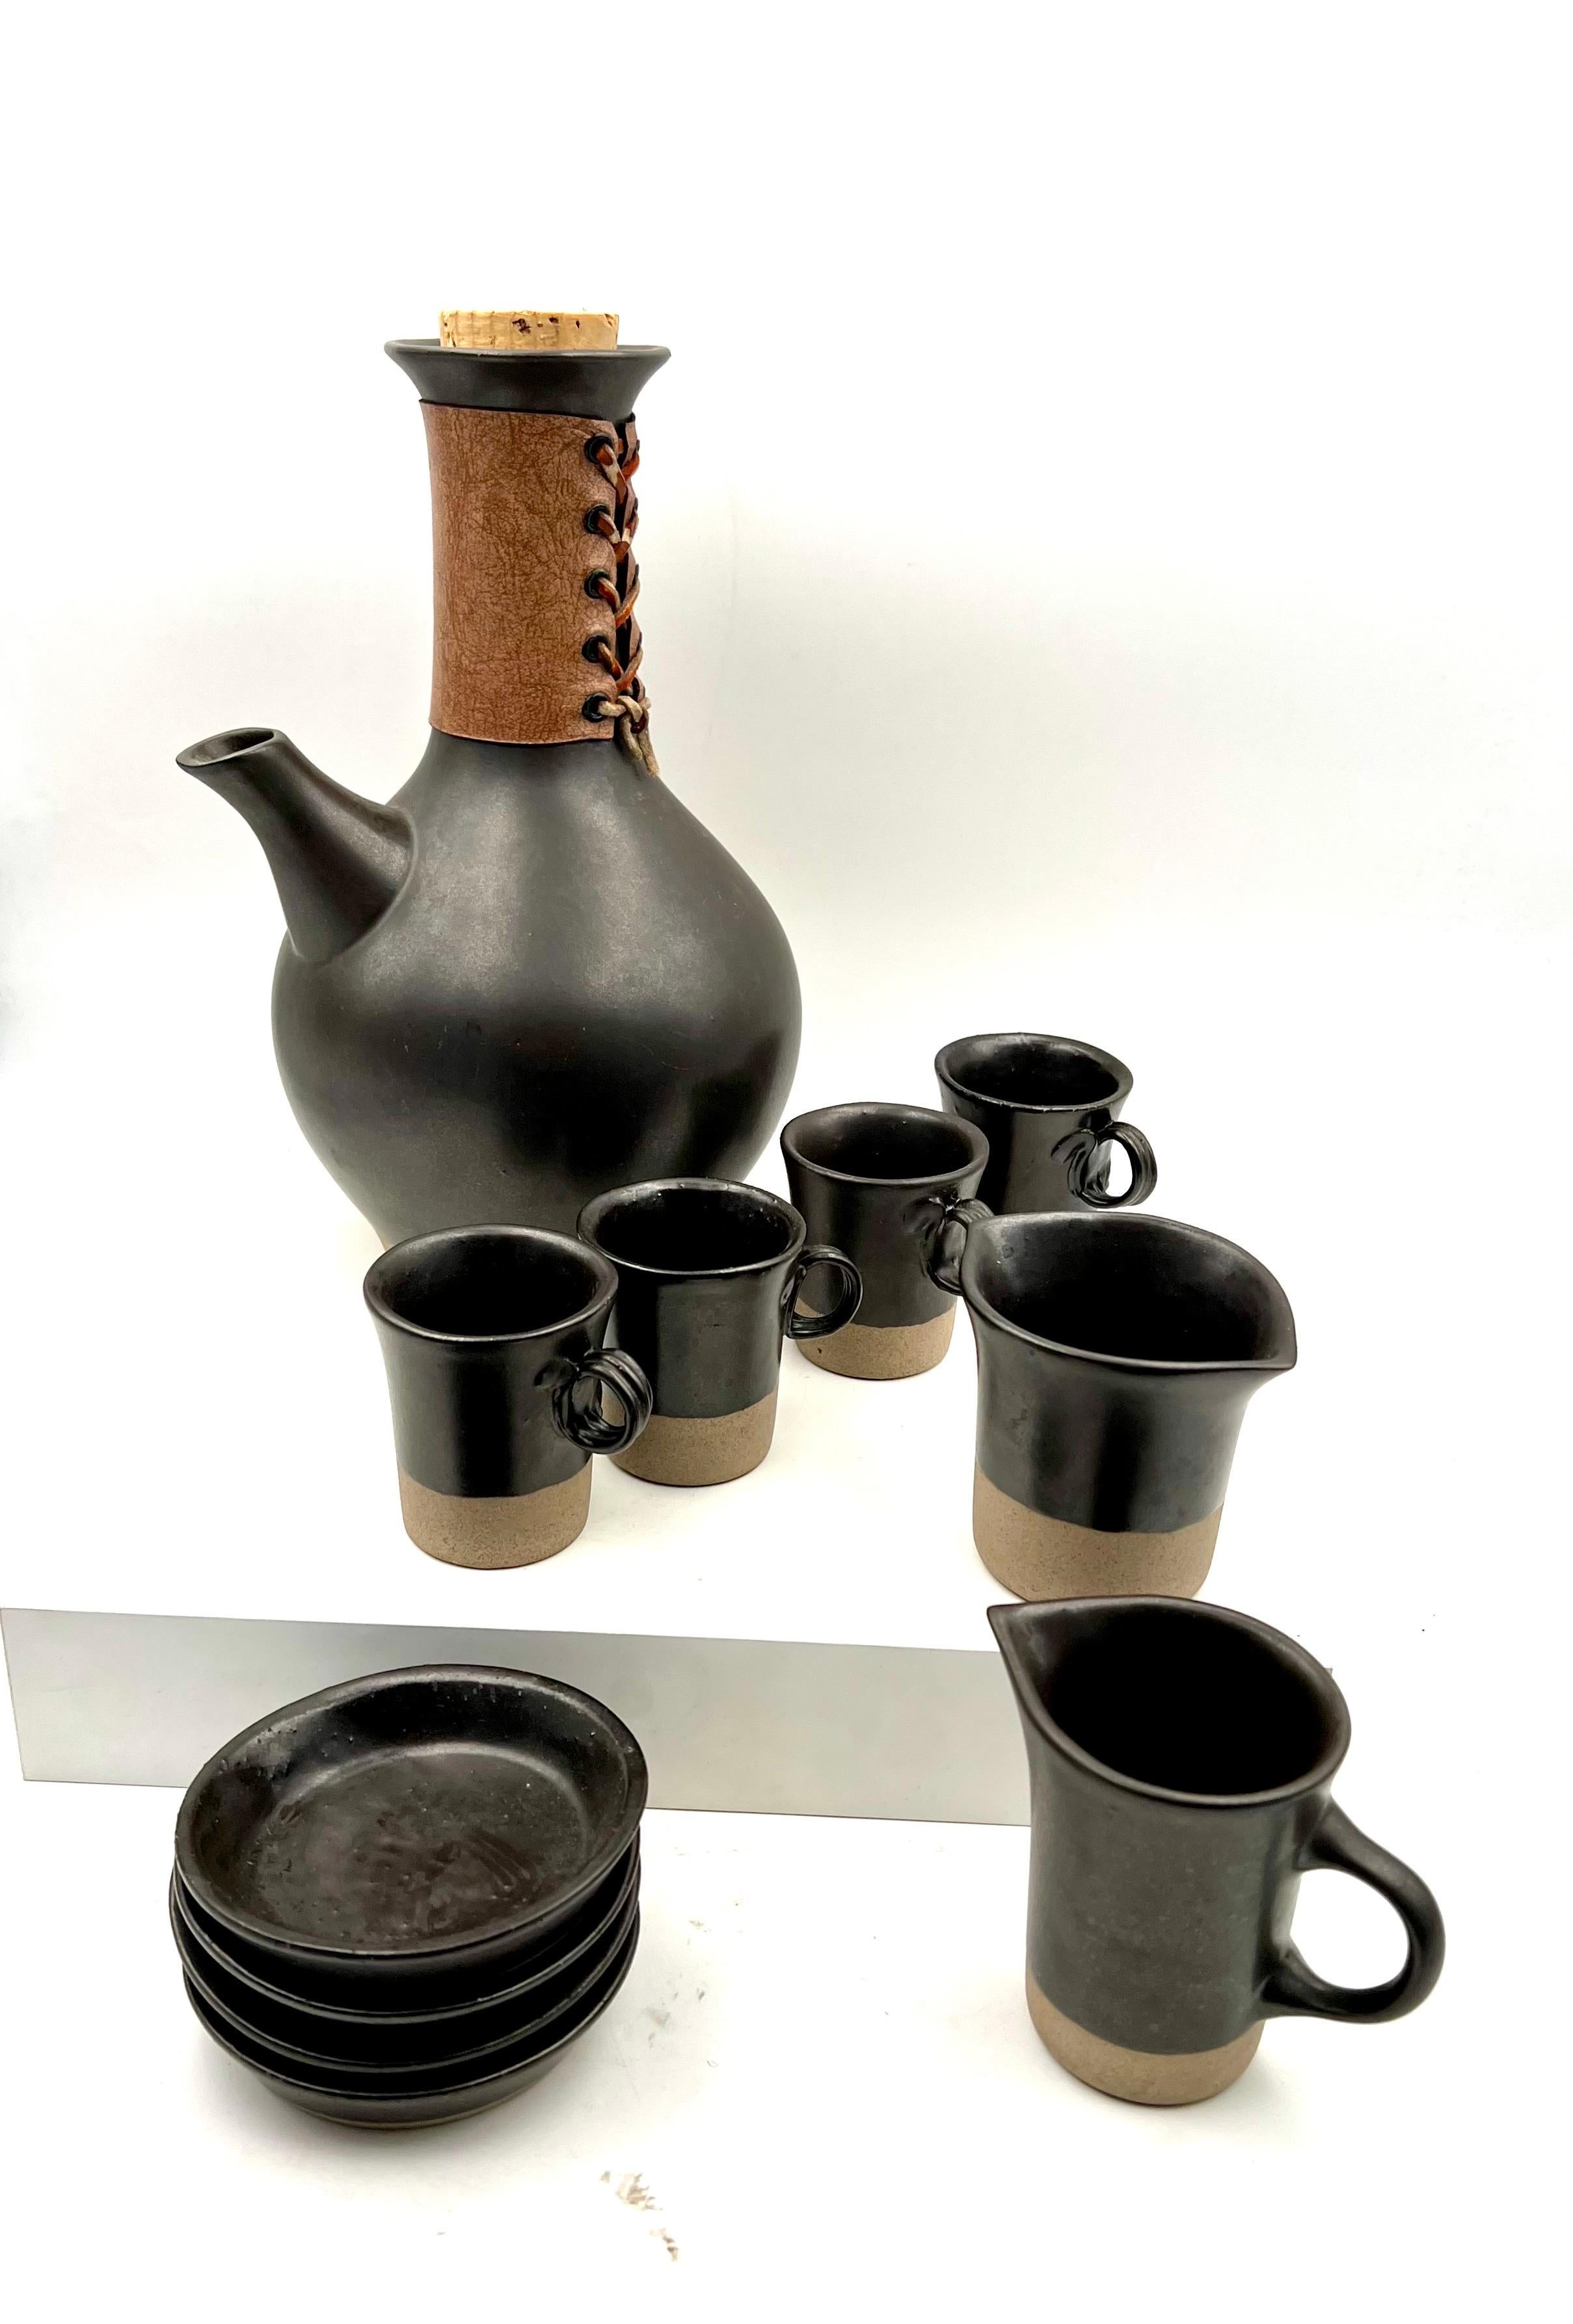 An incredible and rare set by Gordon Martz for Marshall studios each piece is signed and comes with 4 espresso cups, 4 small plates a sugar, and a creamer, nice condition no chips or cracks, nice and hard set to find.